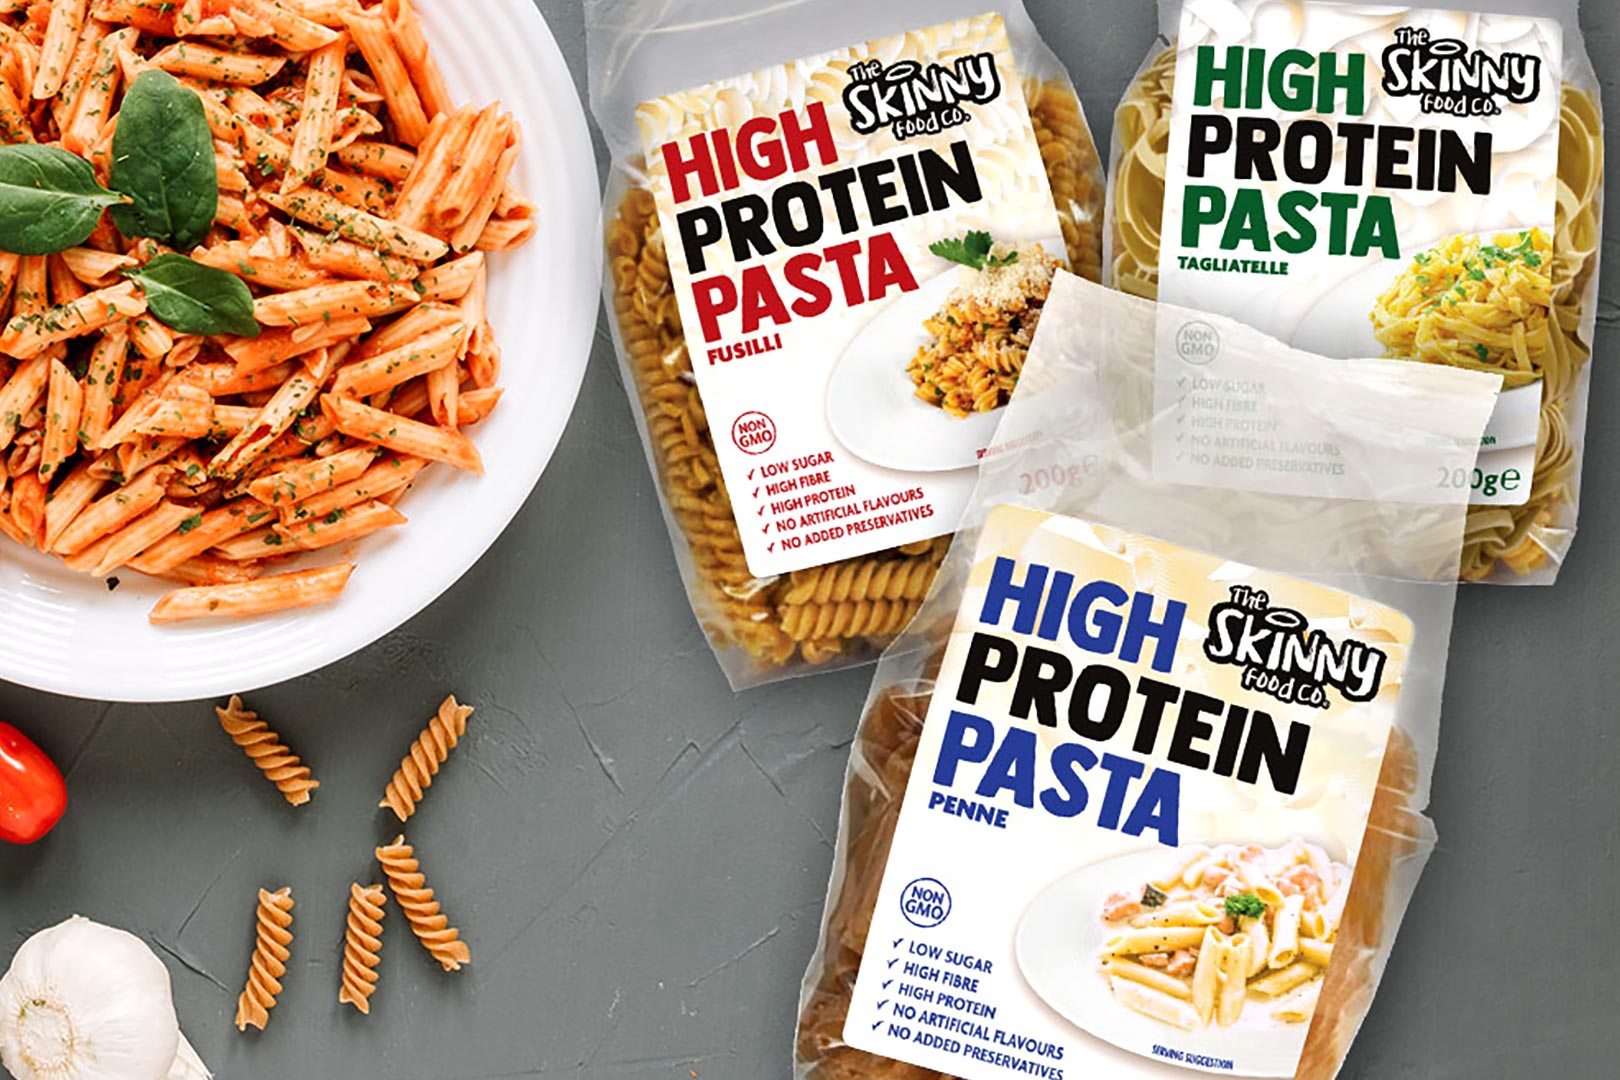 The Skinny Food previews its family of High Protein Pasta